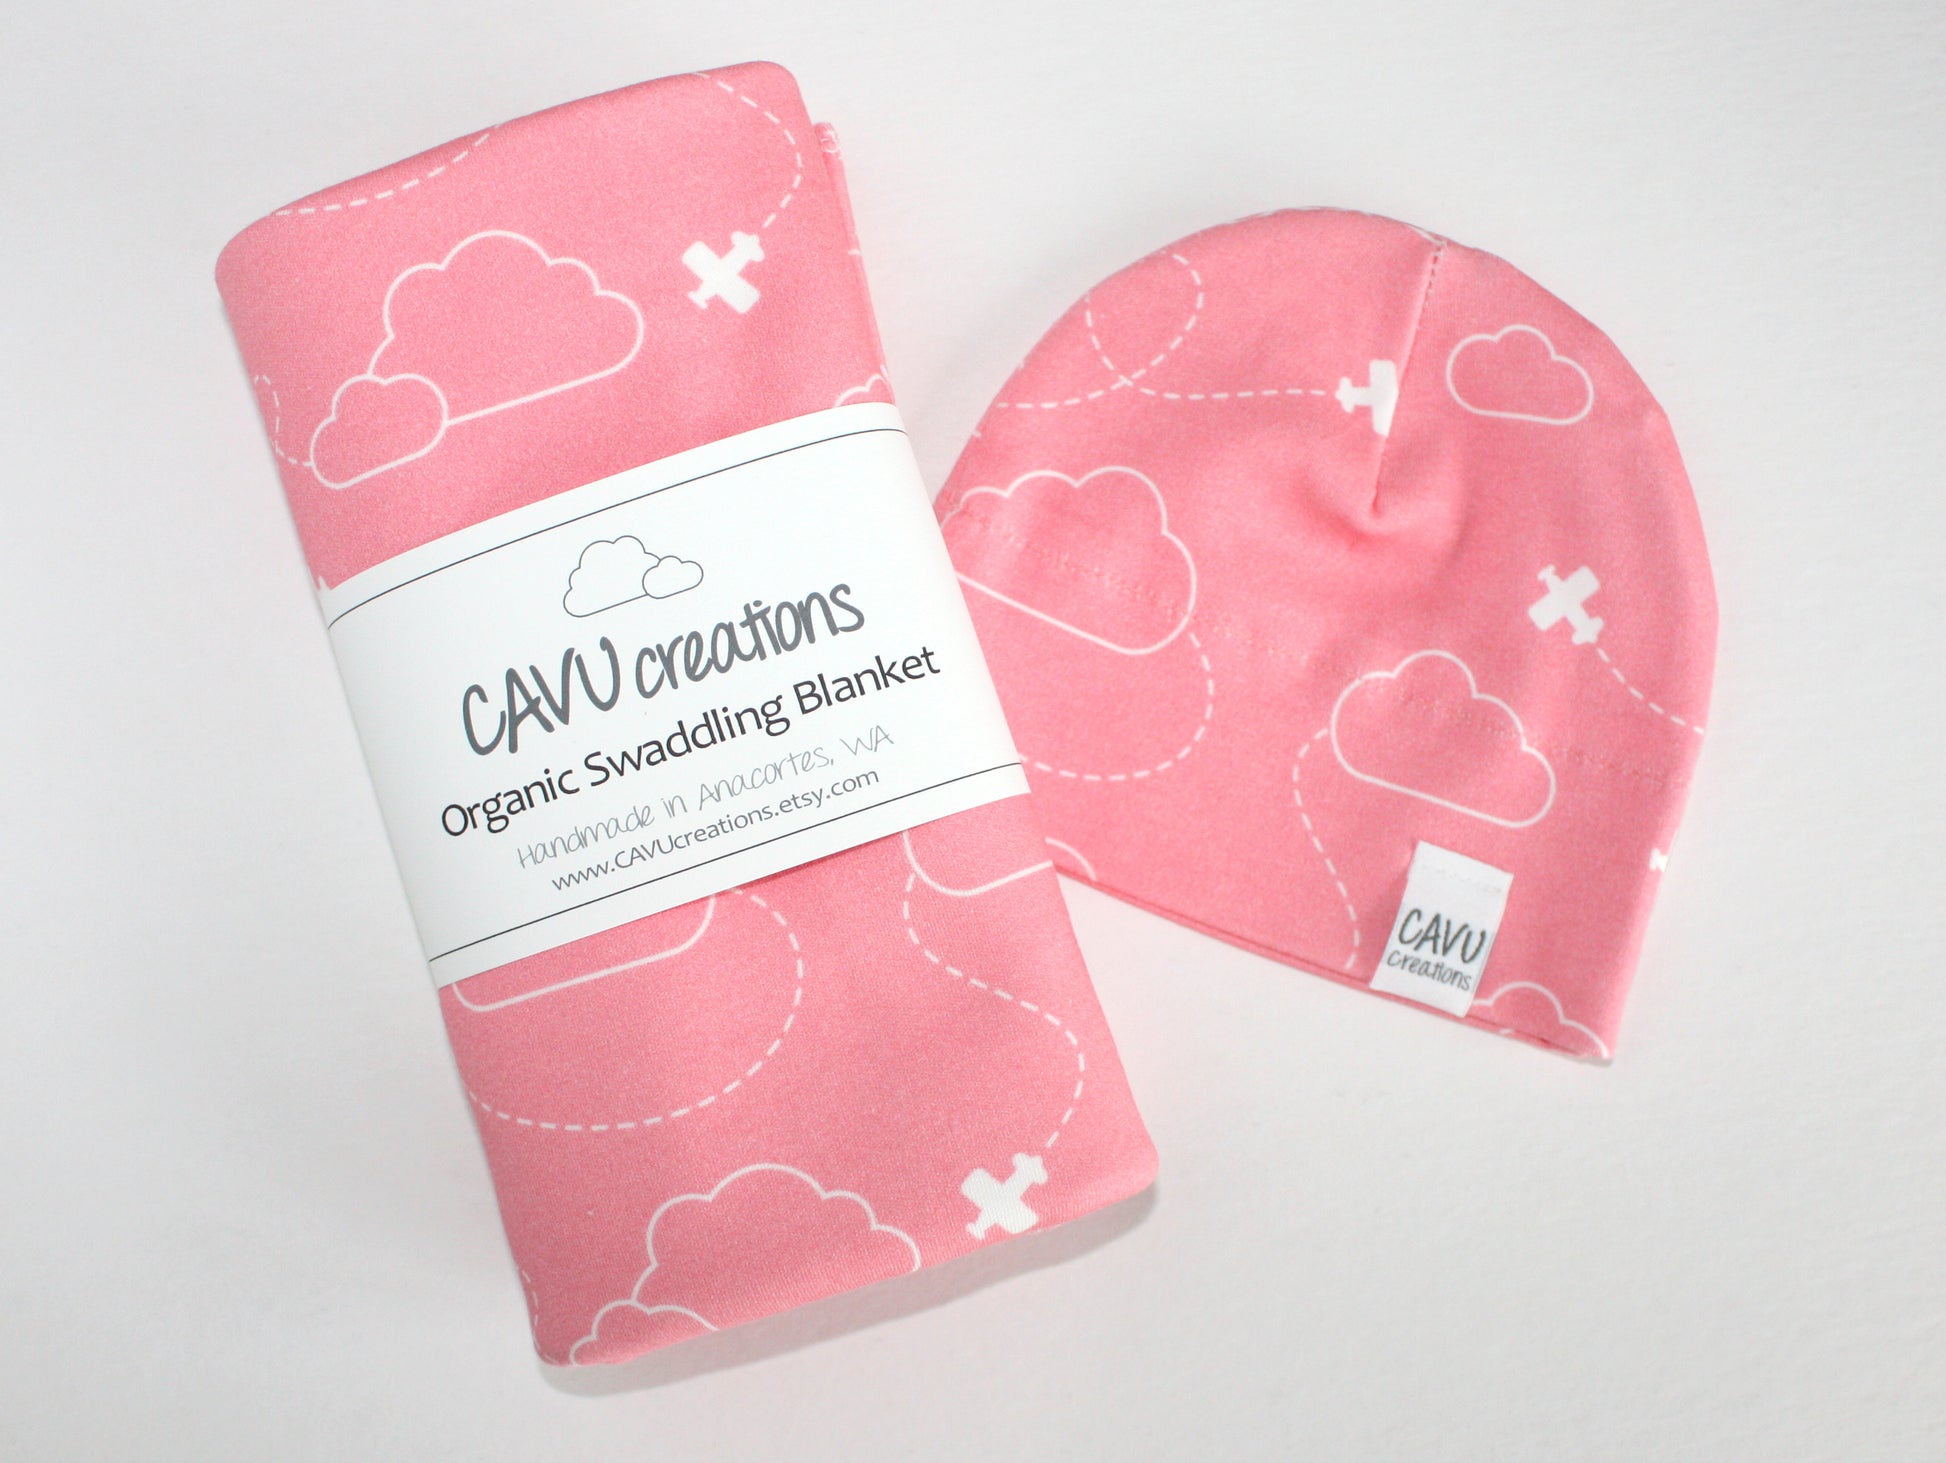 Airplanes in Clouds Organic Swaddling Blanket - White / Coral Pink - CAVU Creations